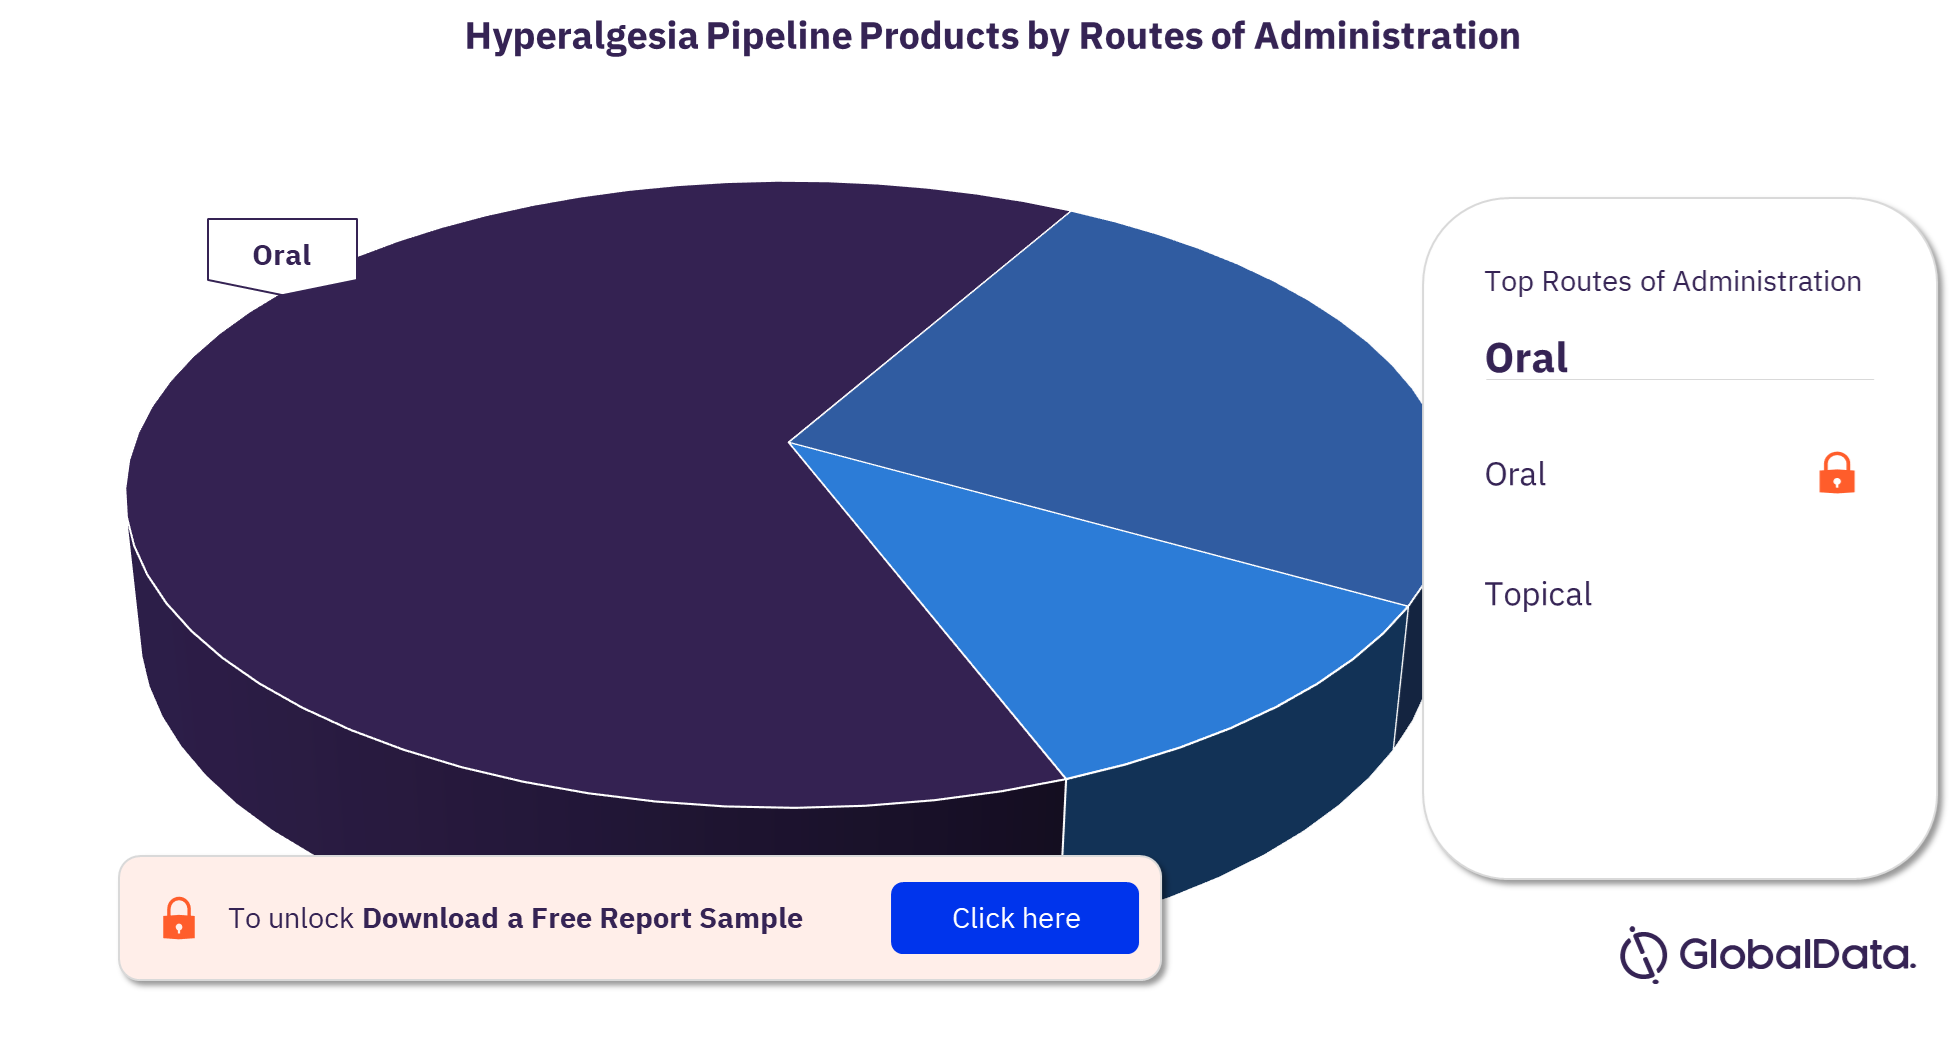 Hyperalgesia pipeline drugs market, by routes of administration